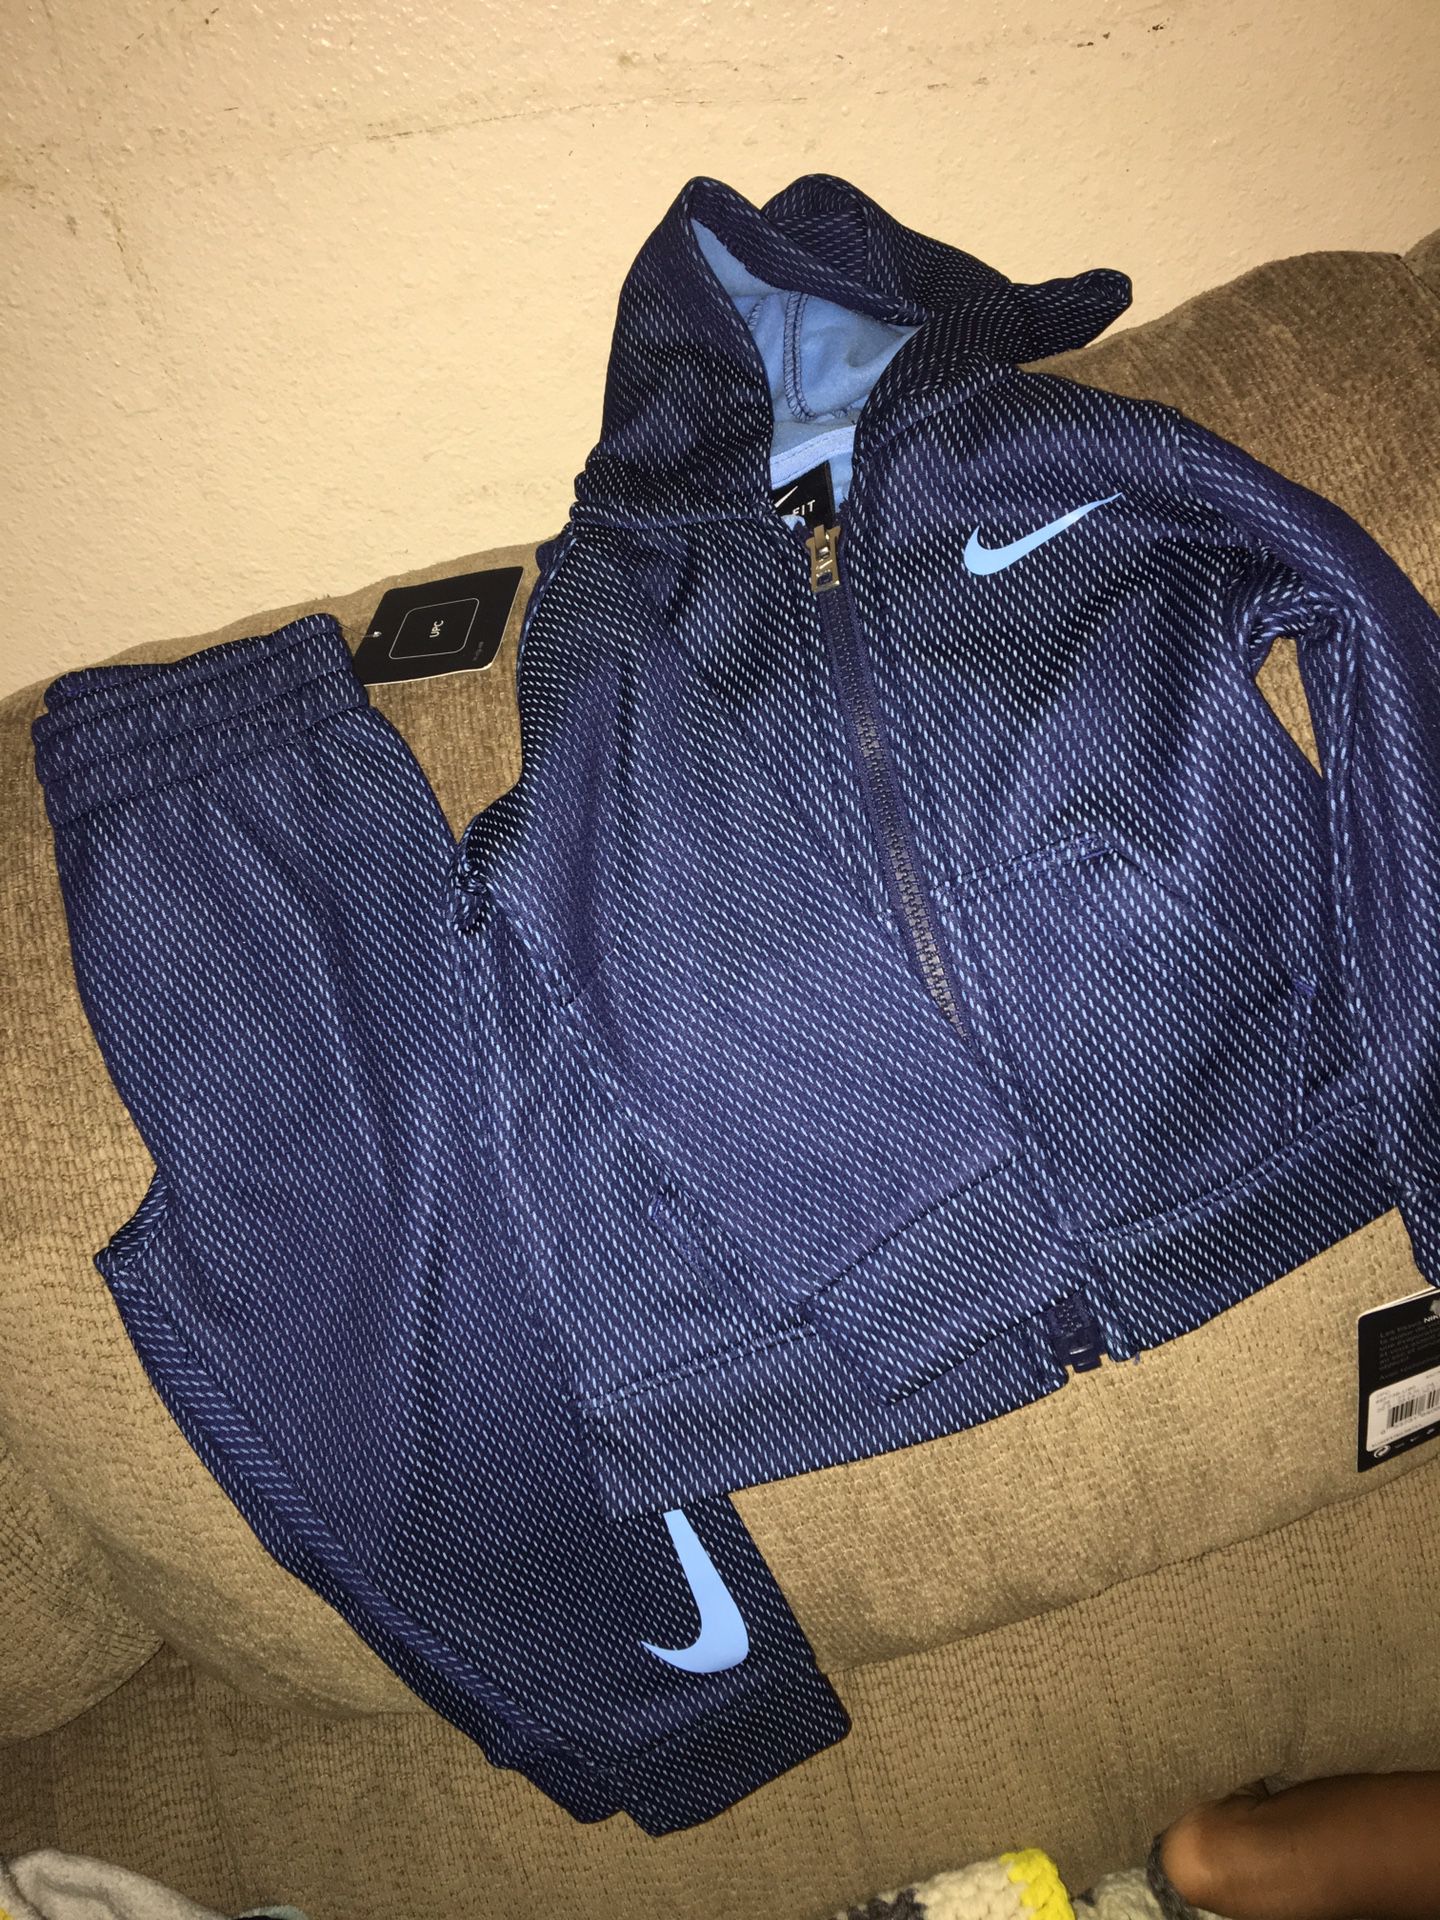 12 months Nike sweat suits